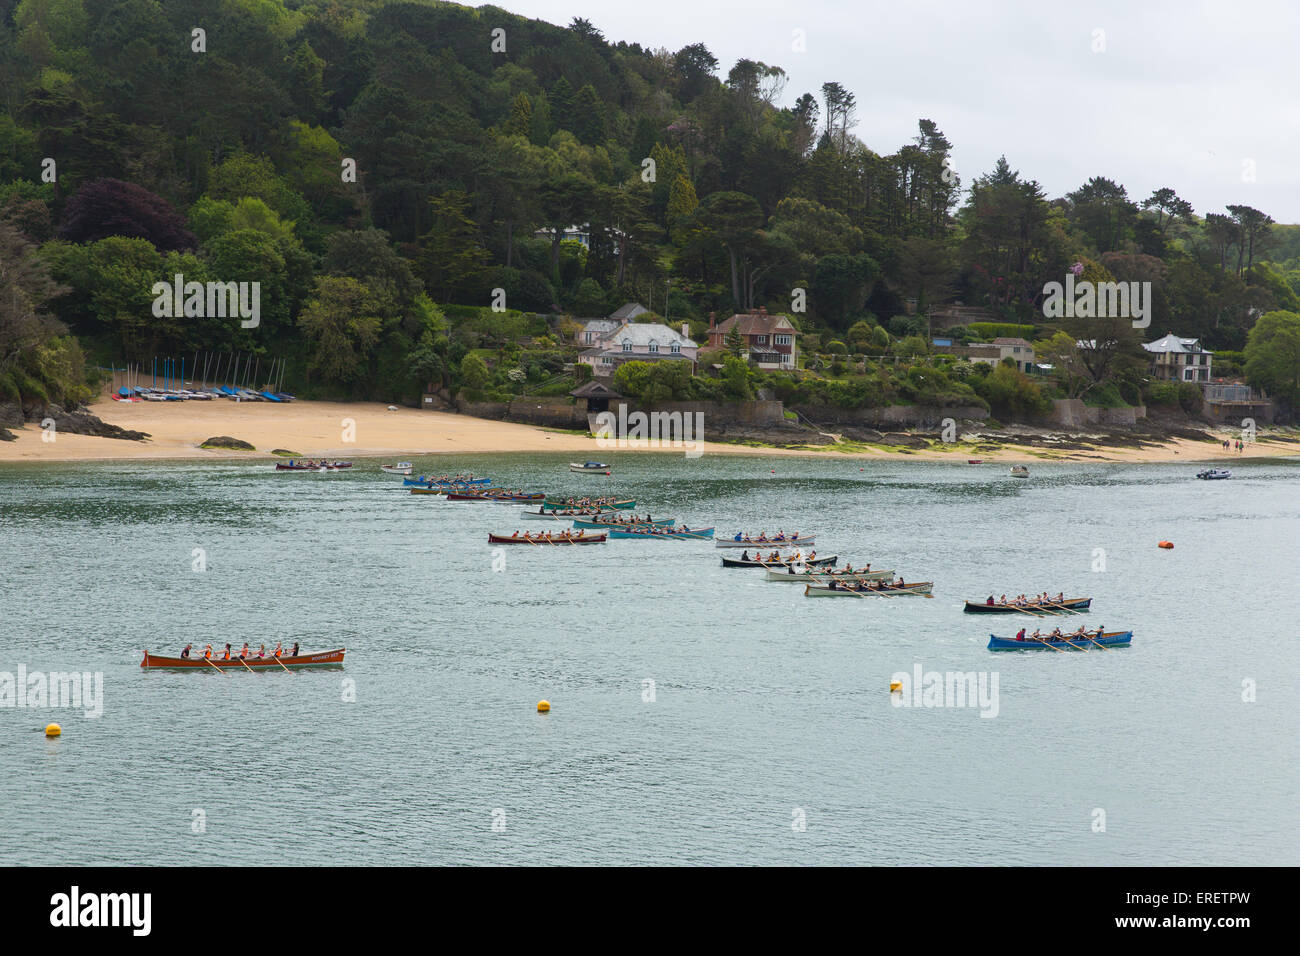 Pilot Gig boat racing rowing event at Salcombe Devon on Sunday 31st May 2015 Stock Photo